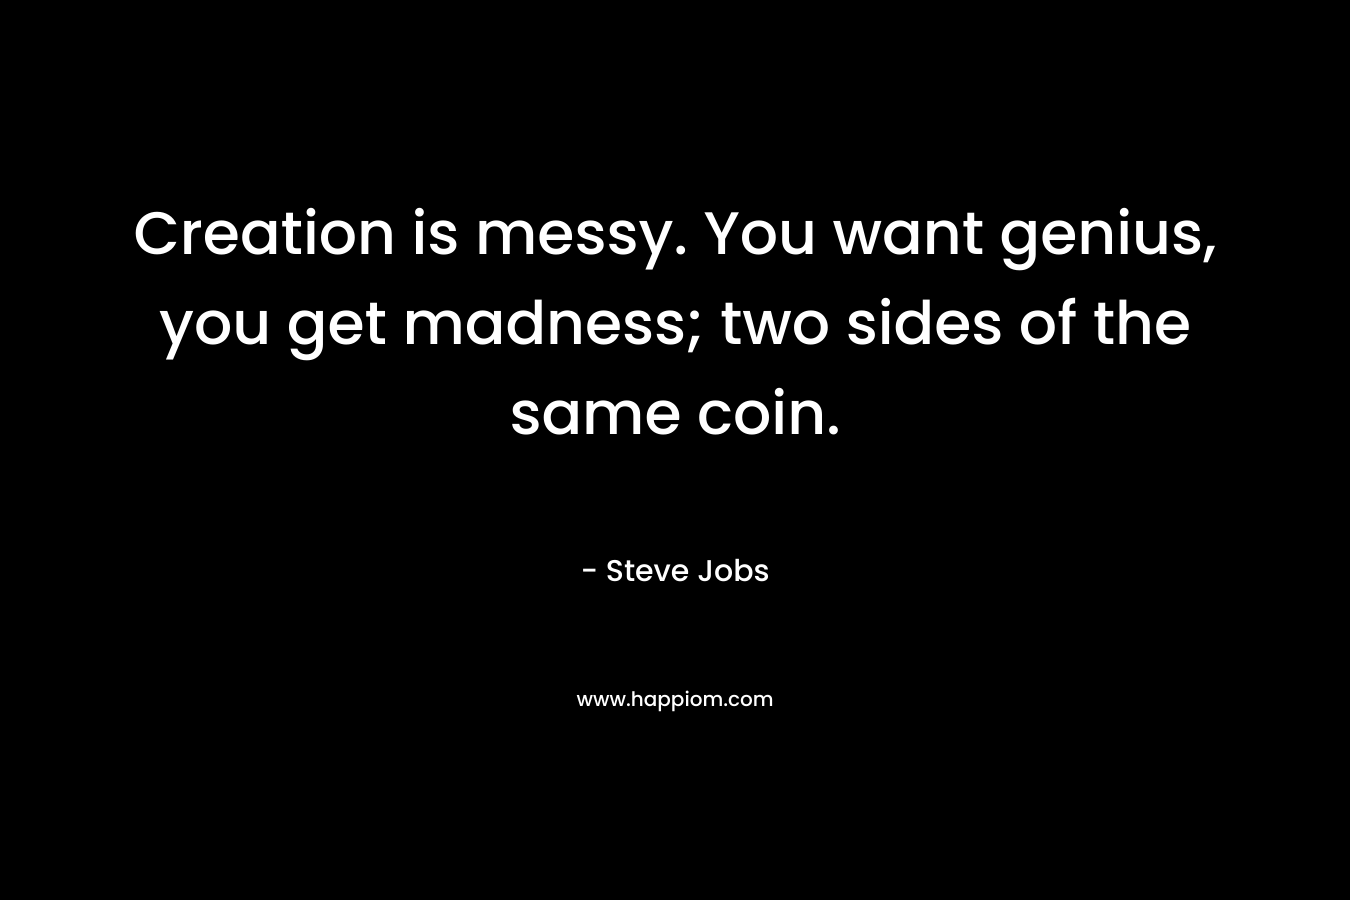 Creation is messy. You want genius, you get madness; two sides of the same coin. – Steve Jobs